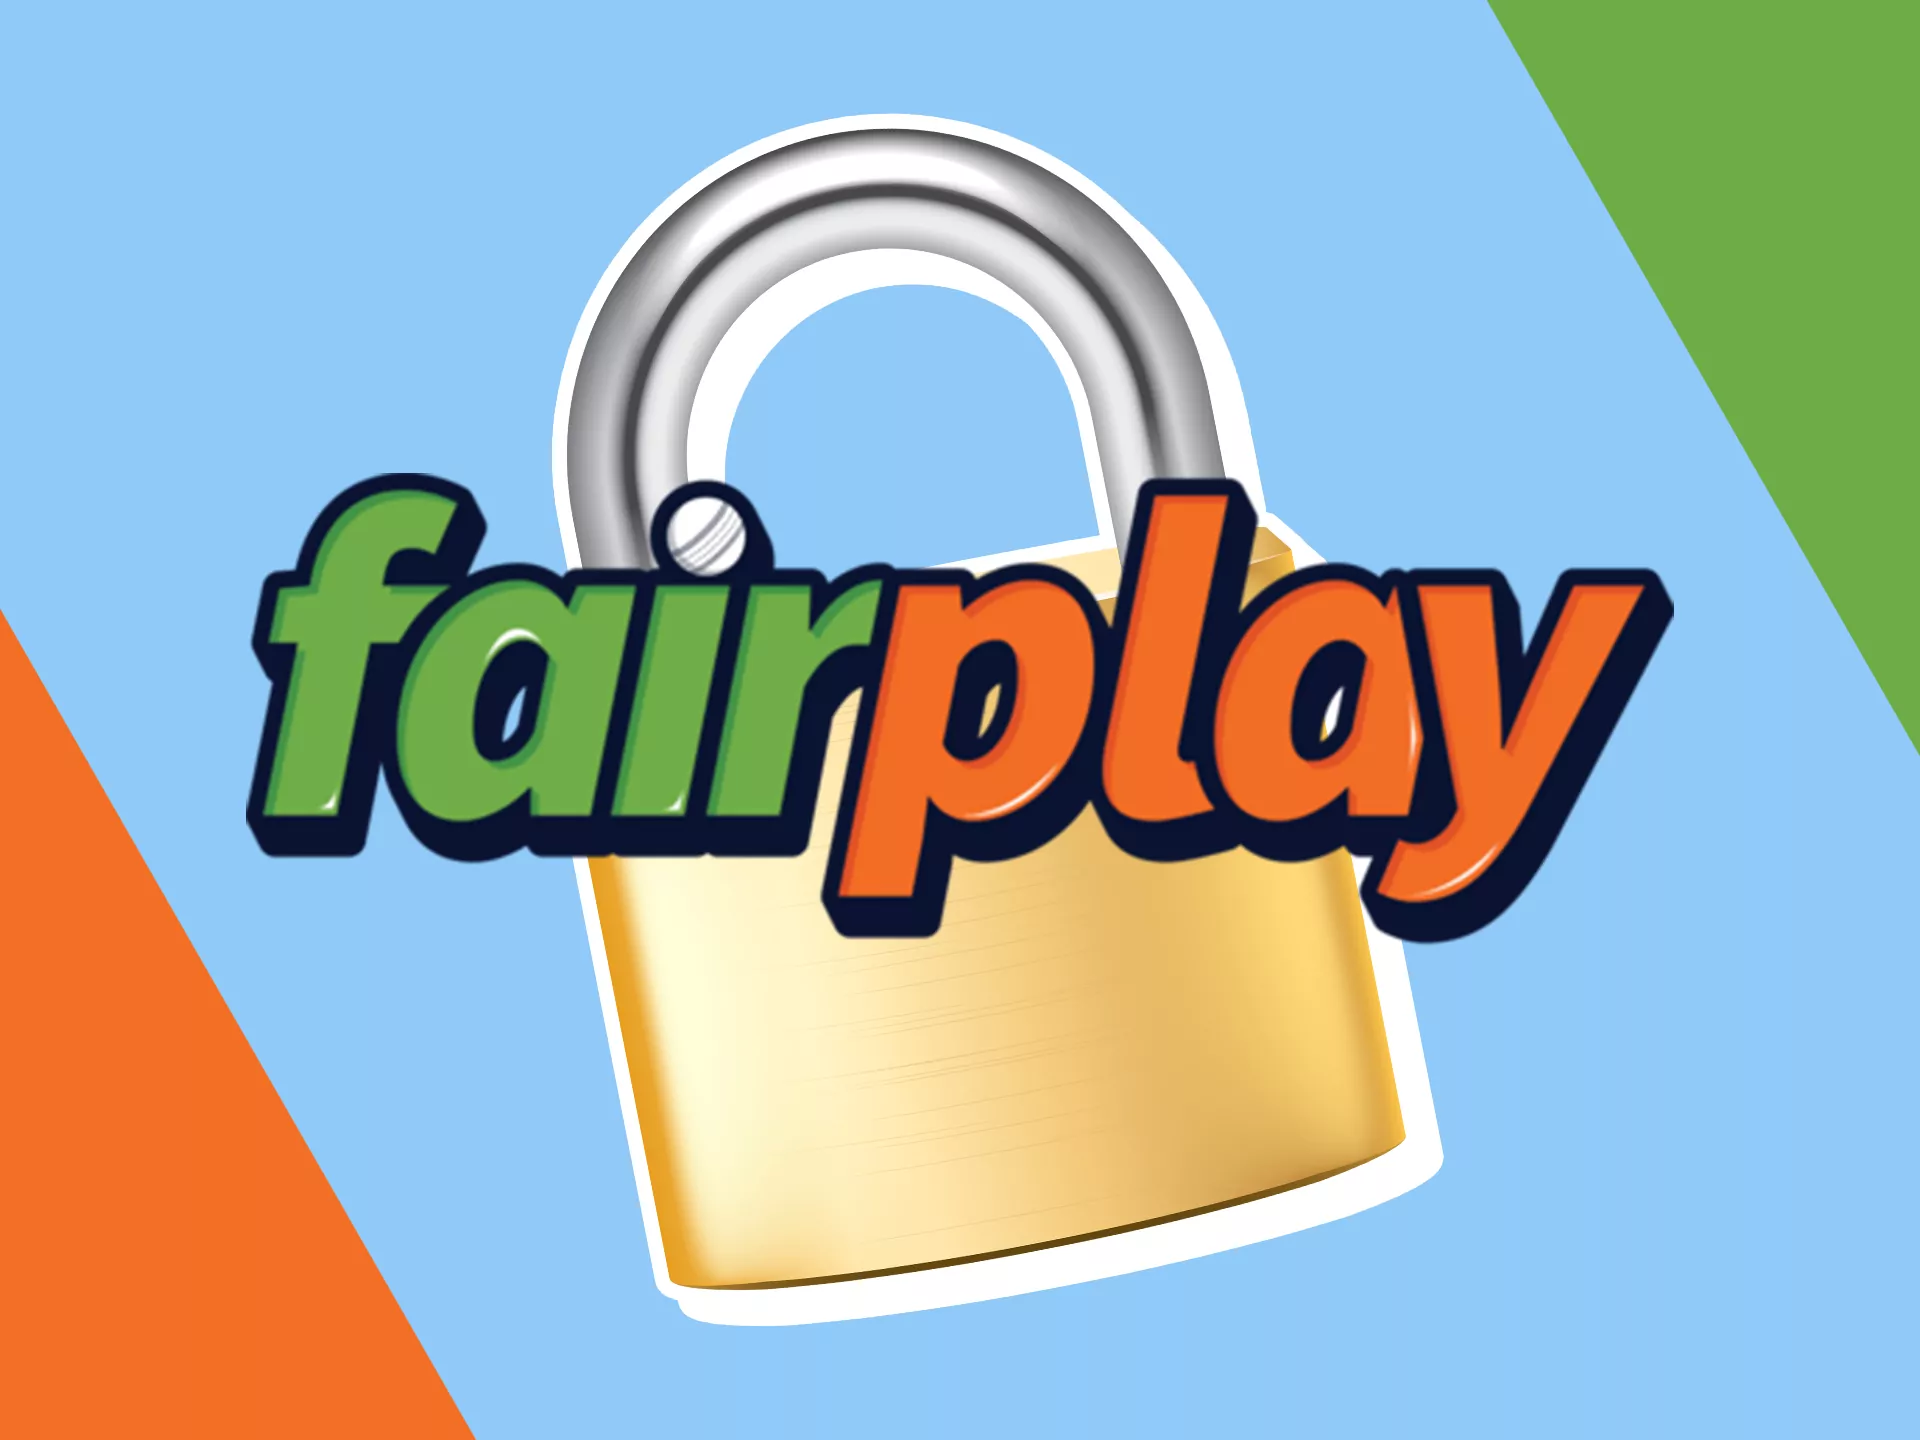 Fairplay app has security for your information and start betting.